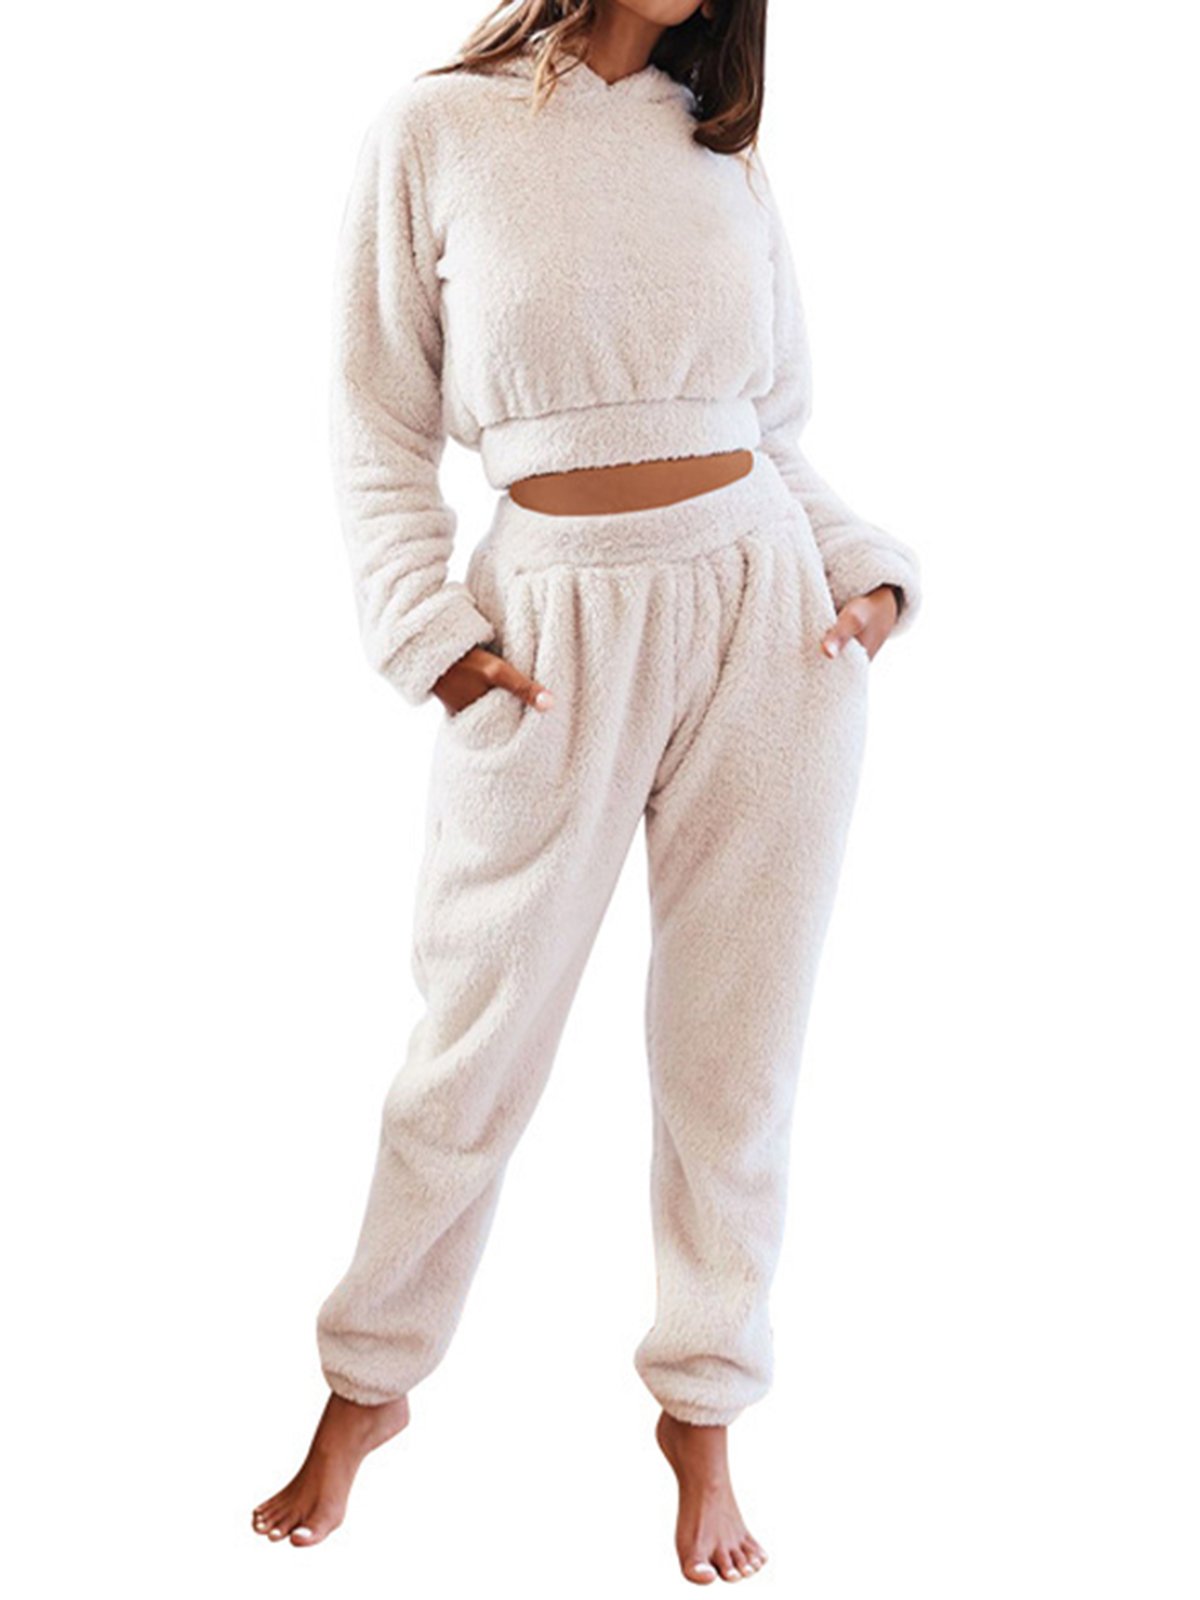 Casual Hooded Loose Plain Two-Piece Set